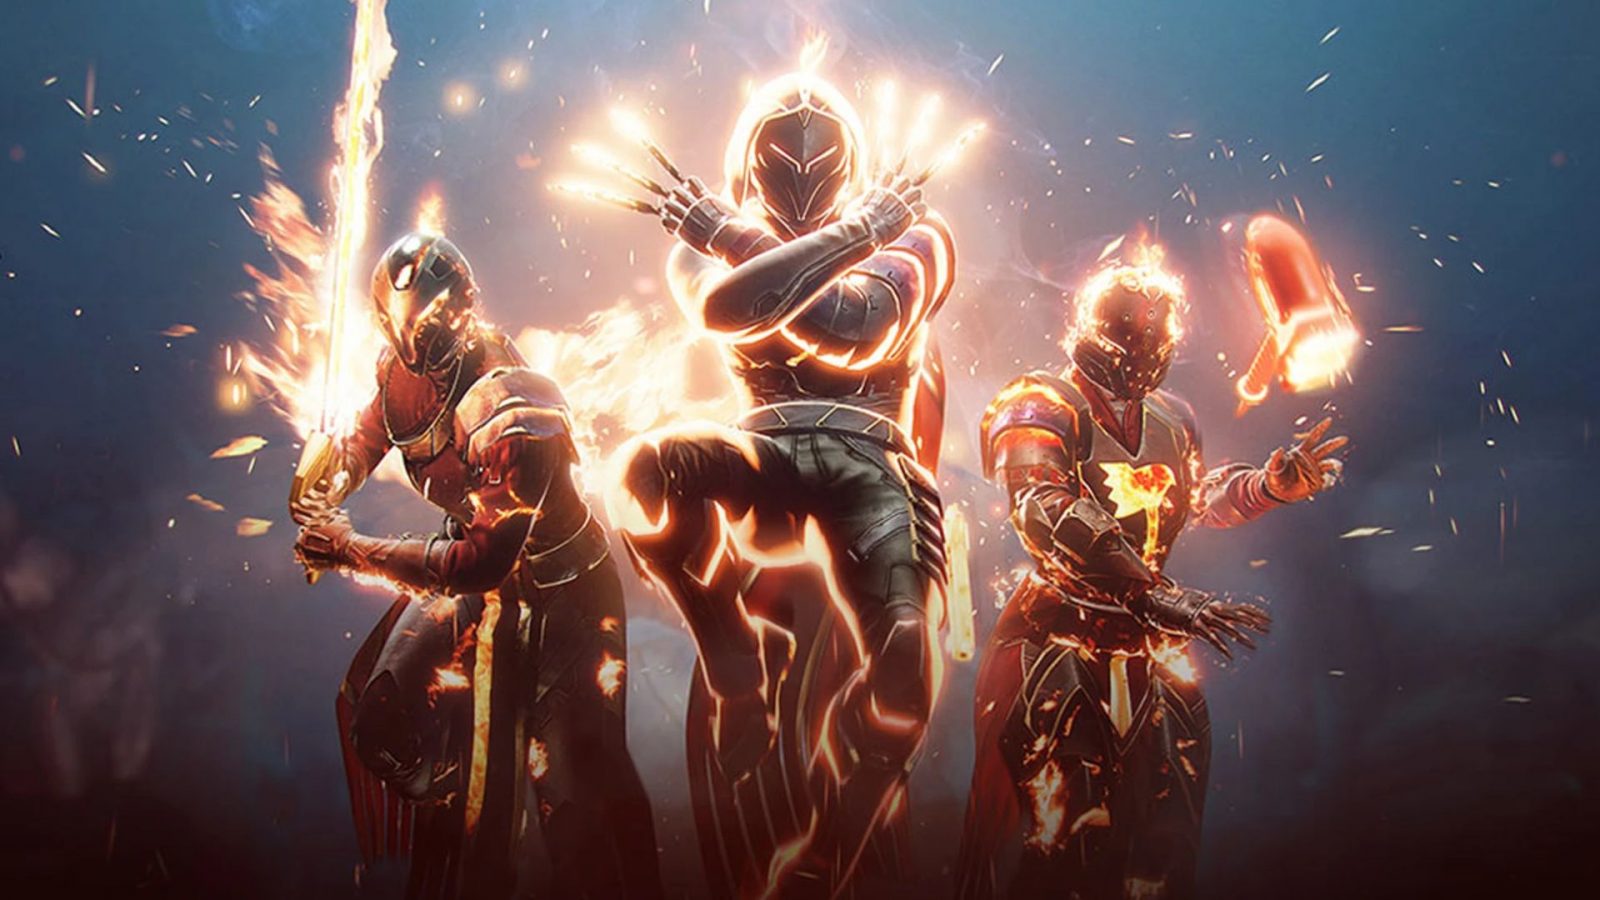 How to Unlock Solar Subclass in Destiny 2 Attack of the Fanboy